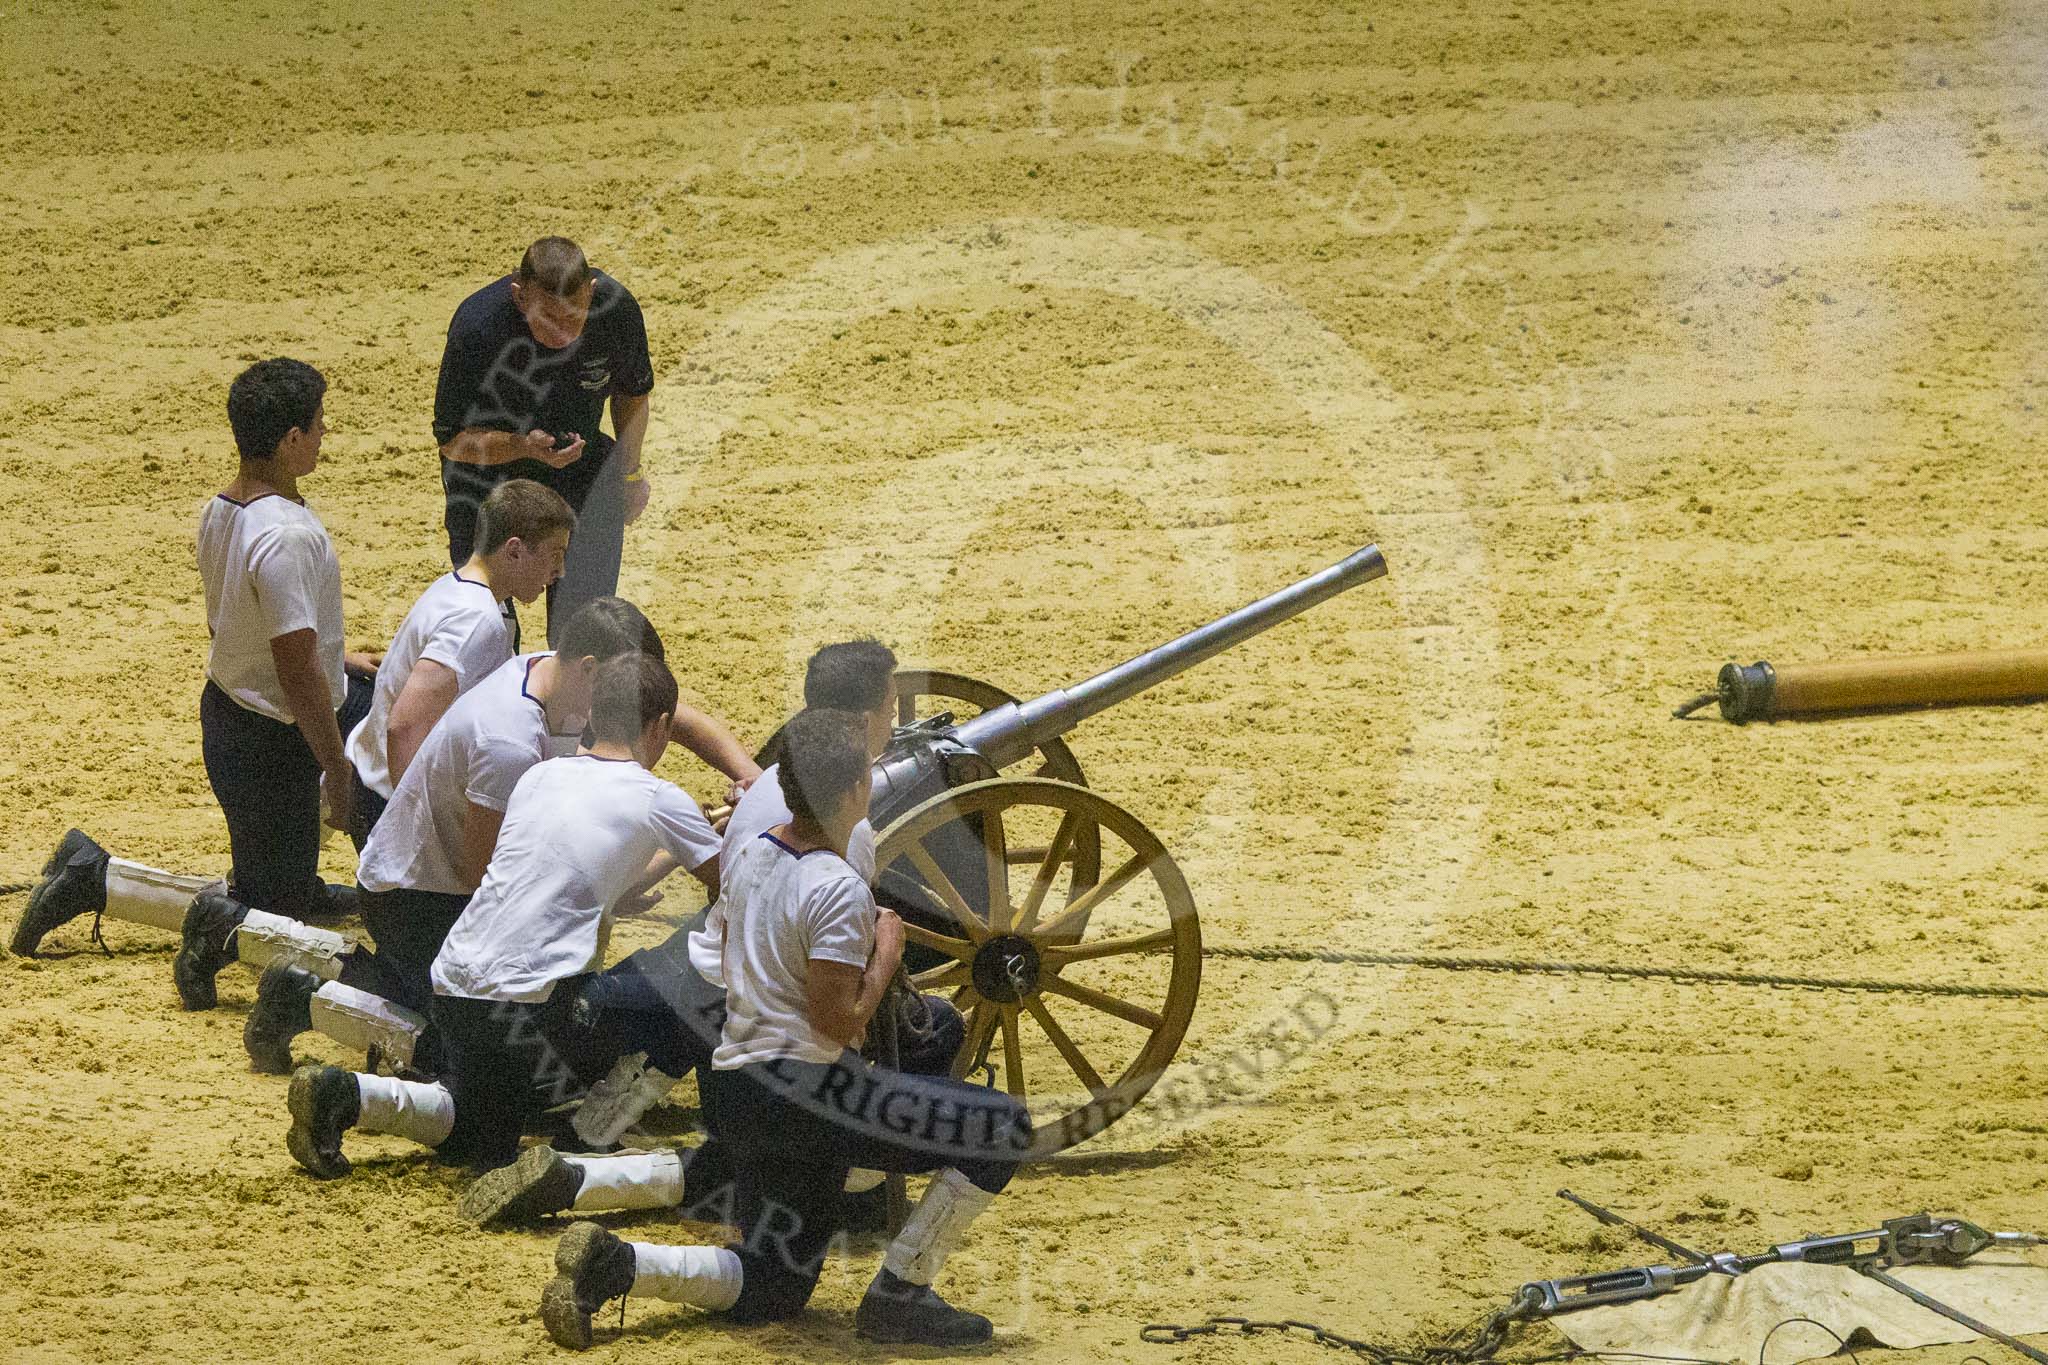 British Military Tournament 2013.
Earls Court,
London SW5,

United Kingdom,
on 06 December 2013 at 16:09, image #318